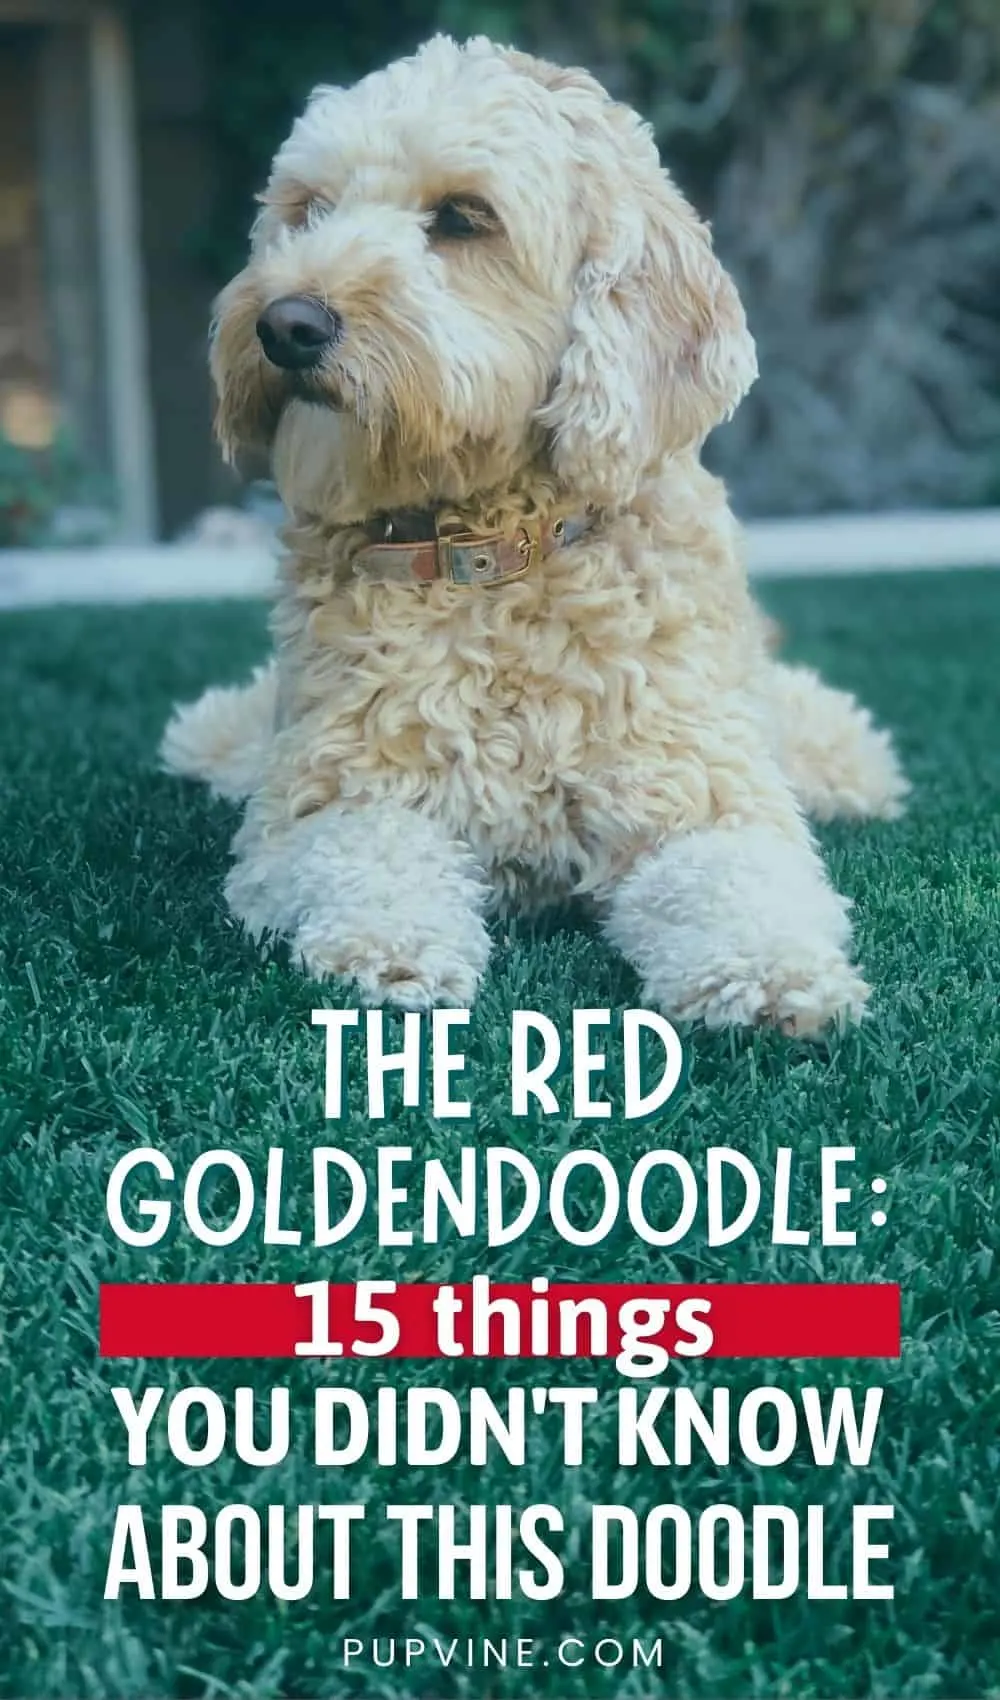 The Red Goldendoodle 15 Things You Didn't Know About This Doodle